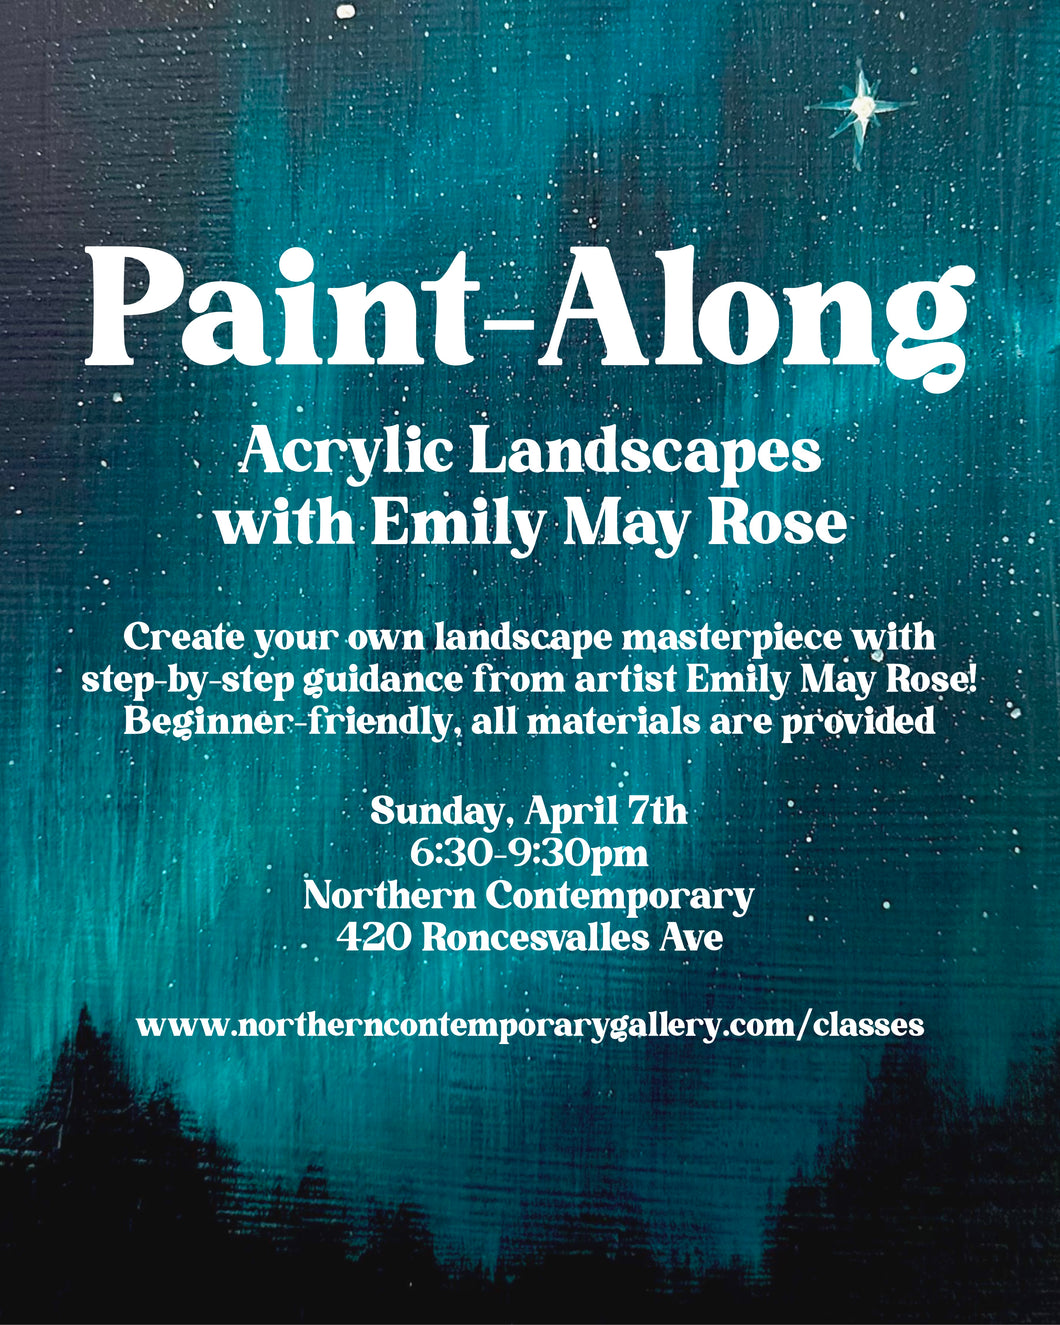 Paint-Along With Emily May Rose